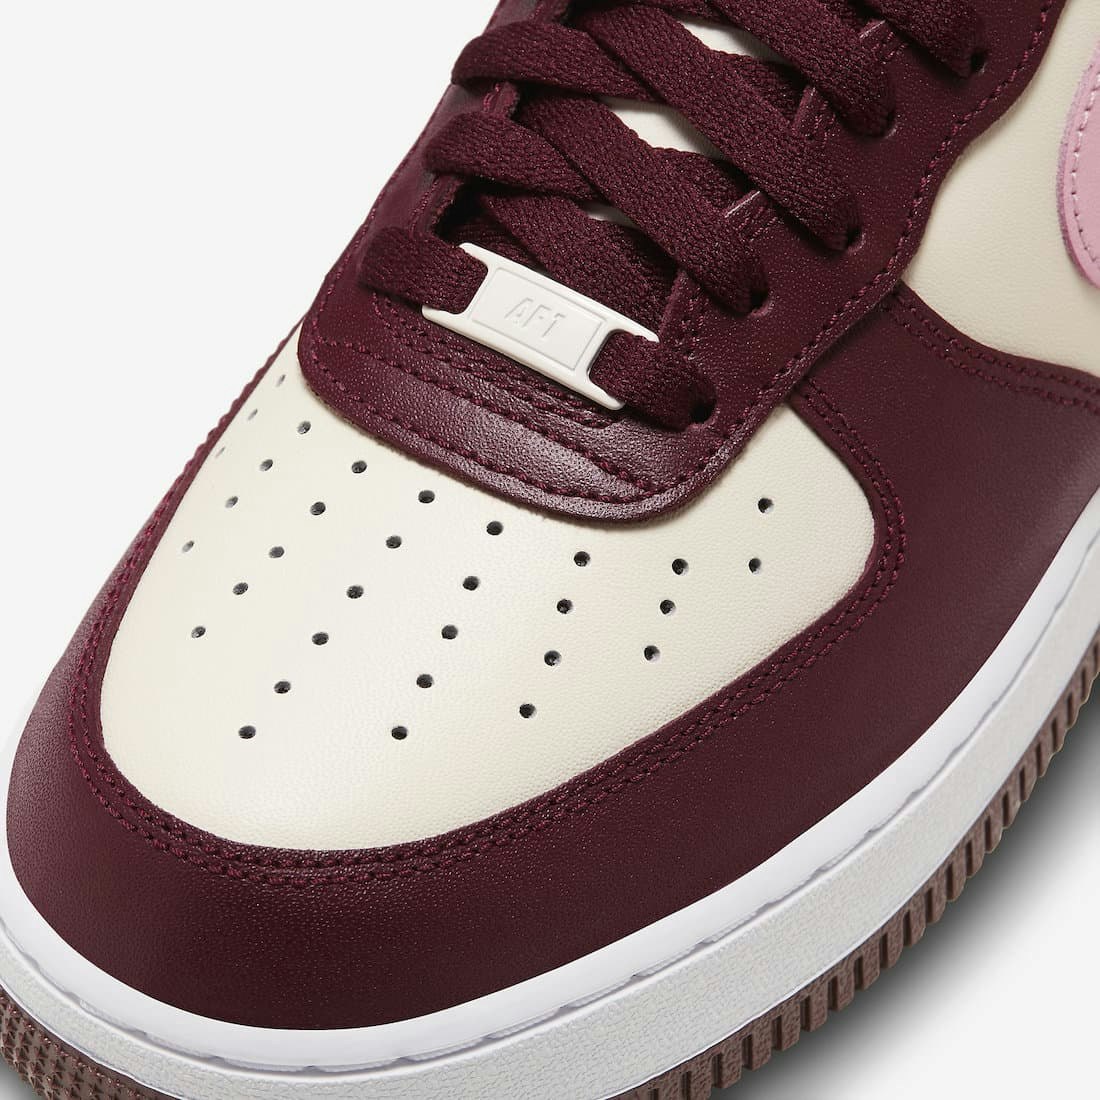 Nike Air Force 1 Low "Valentine’s Day" 